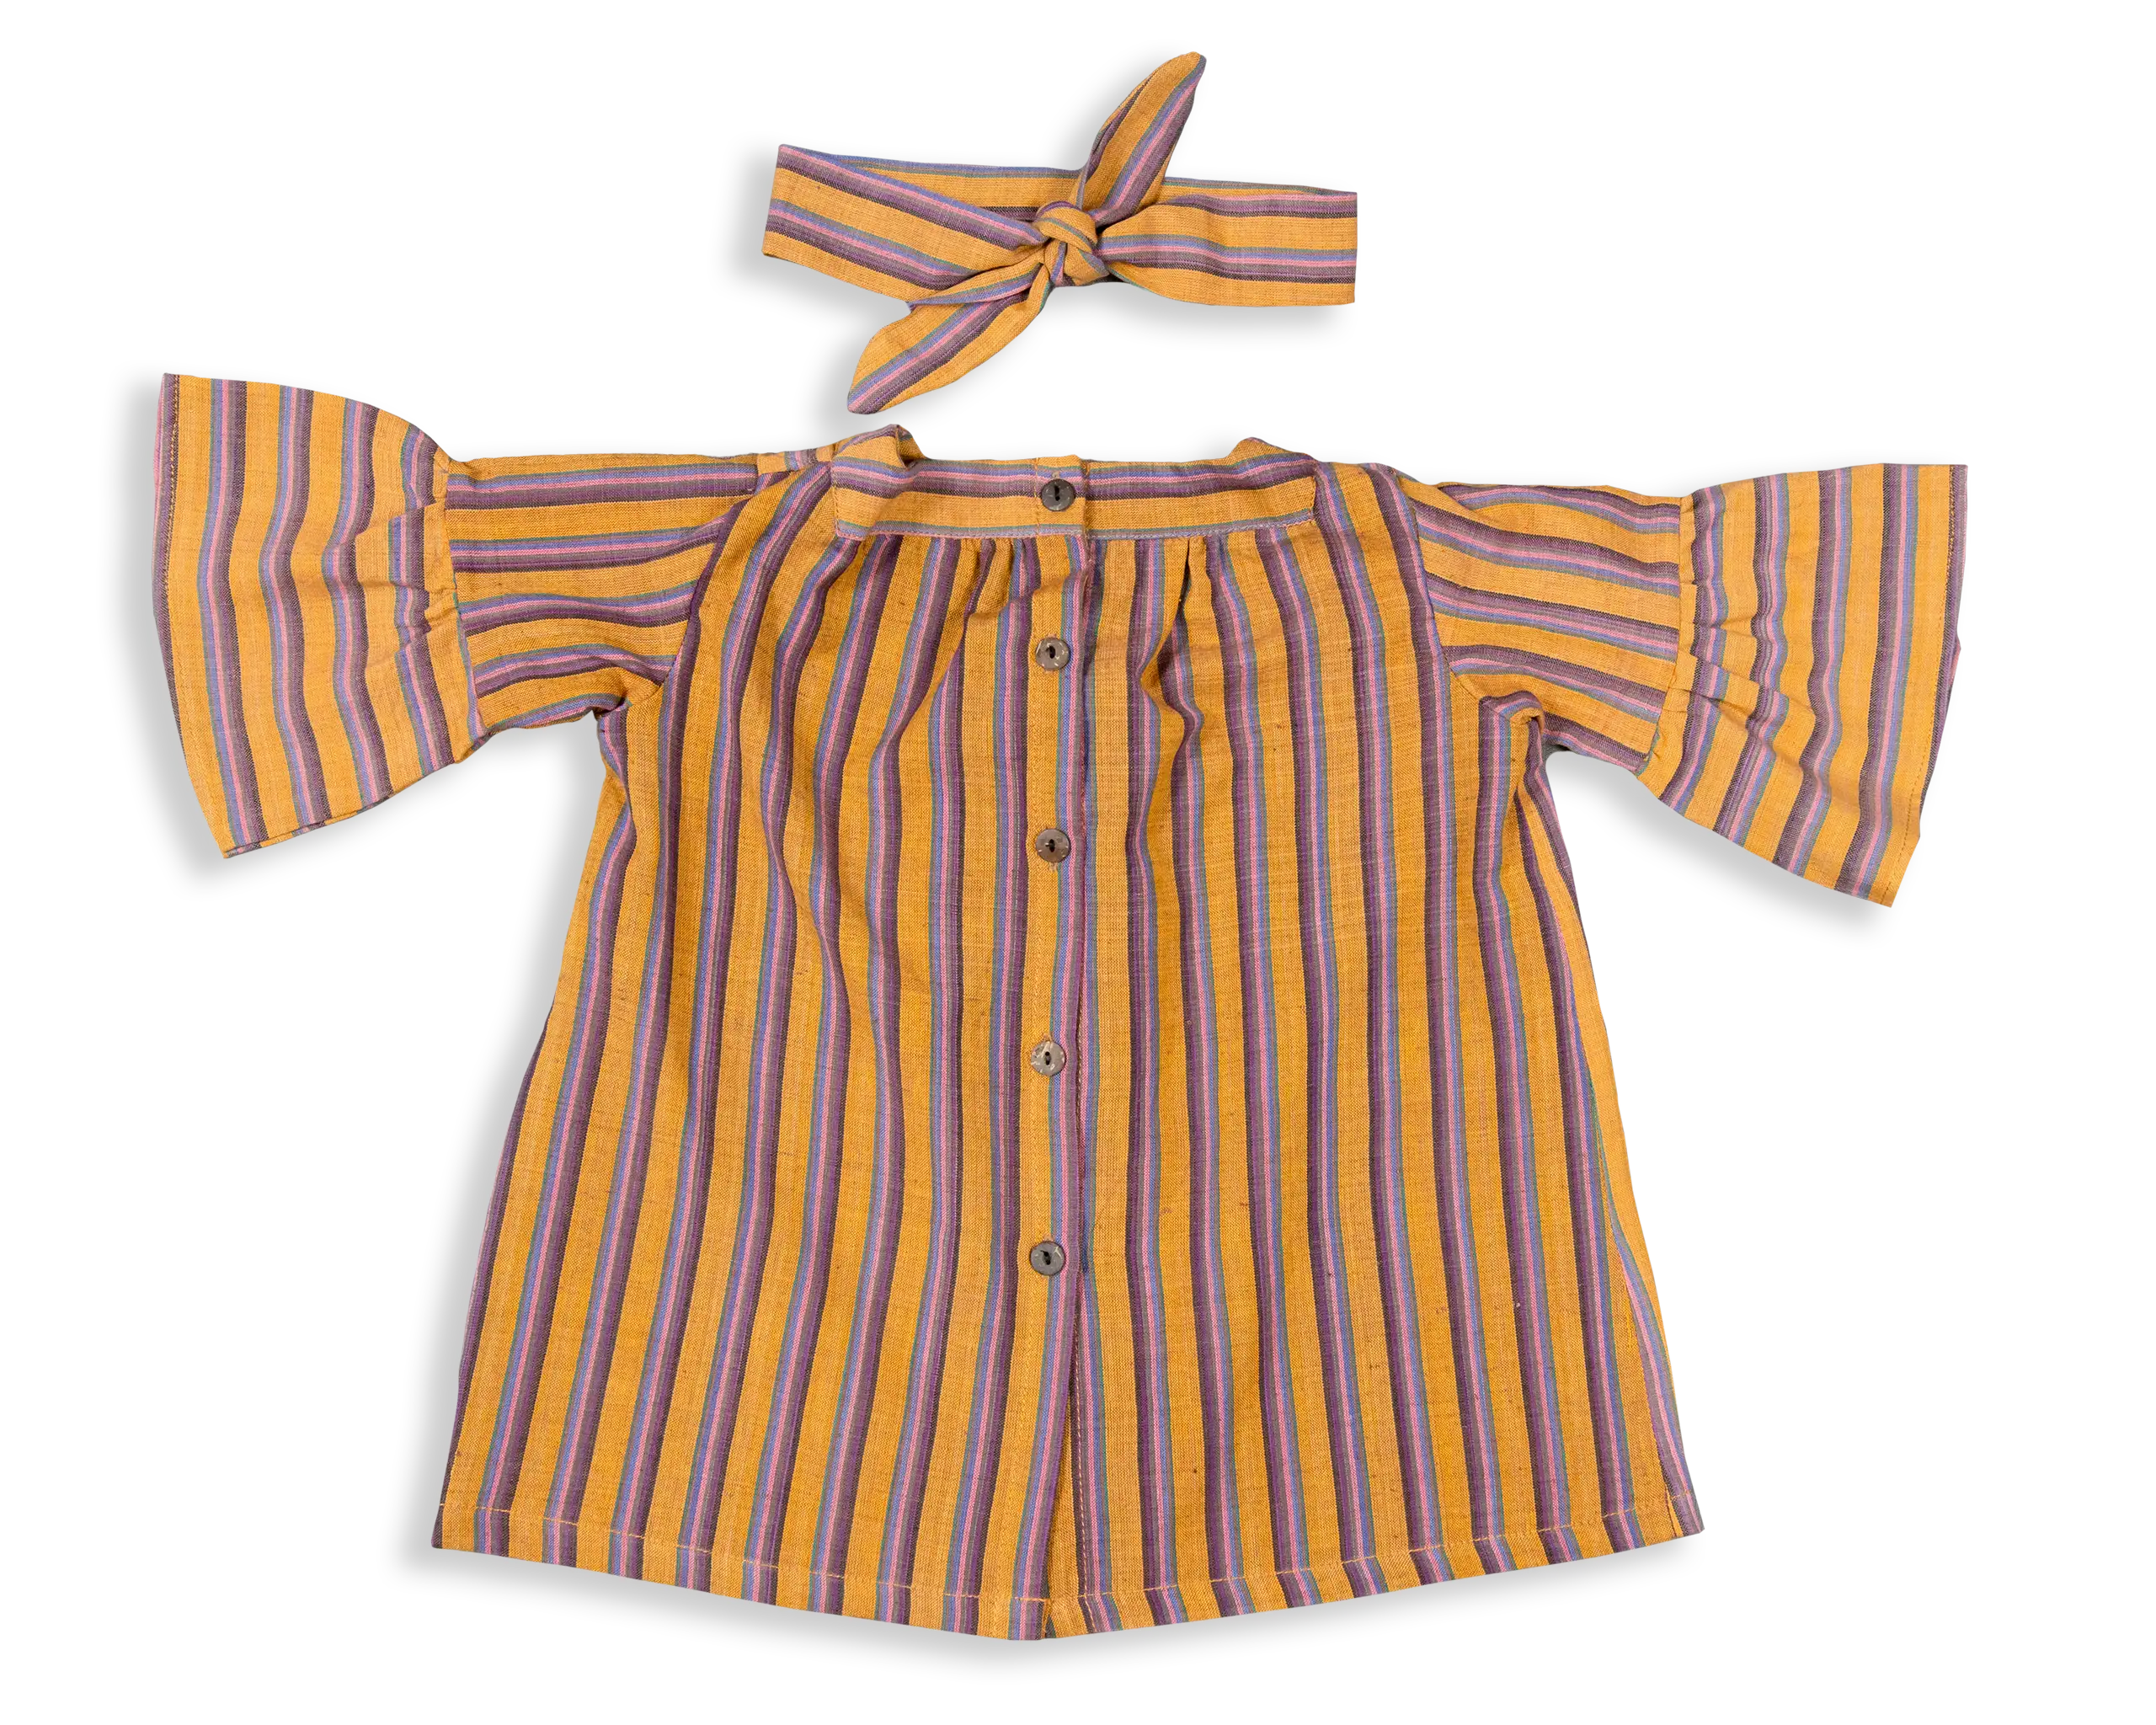 Buddies is a Tunic Style Dress that comes with mid length flared sleeves and a matching hairband. Perfect romp-around dress for those bright and breezy sunny days.